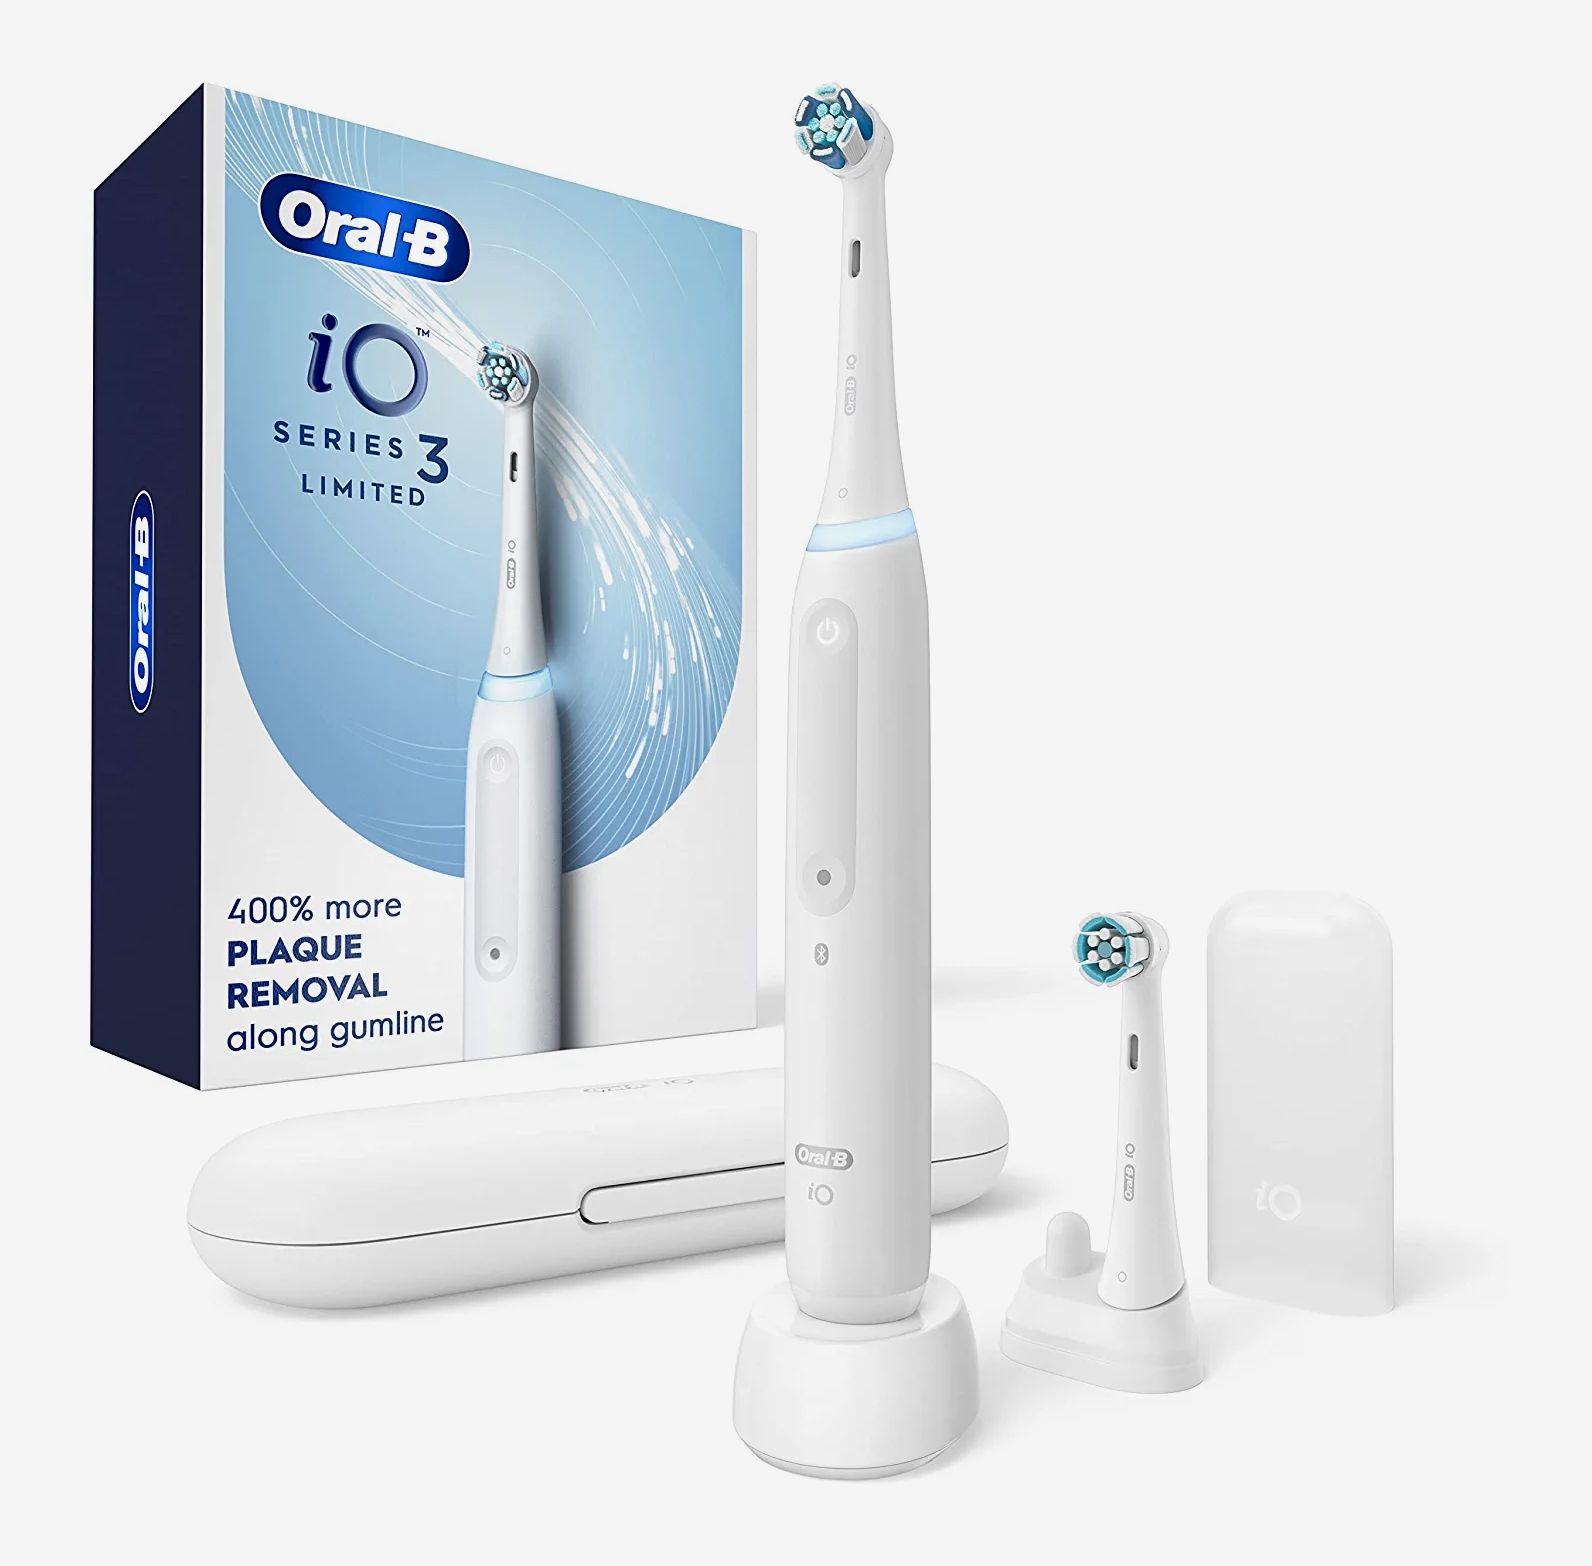 Spring Sale 2023: Best deals from Ninja and Oral-b — The Telegraph